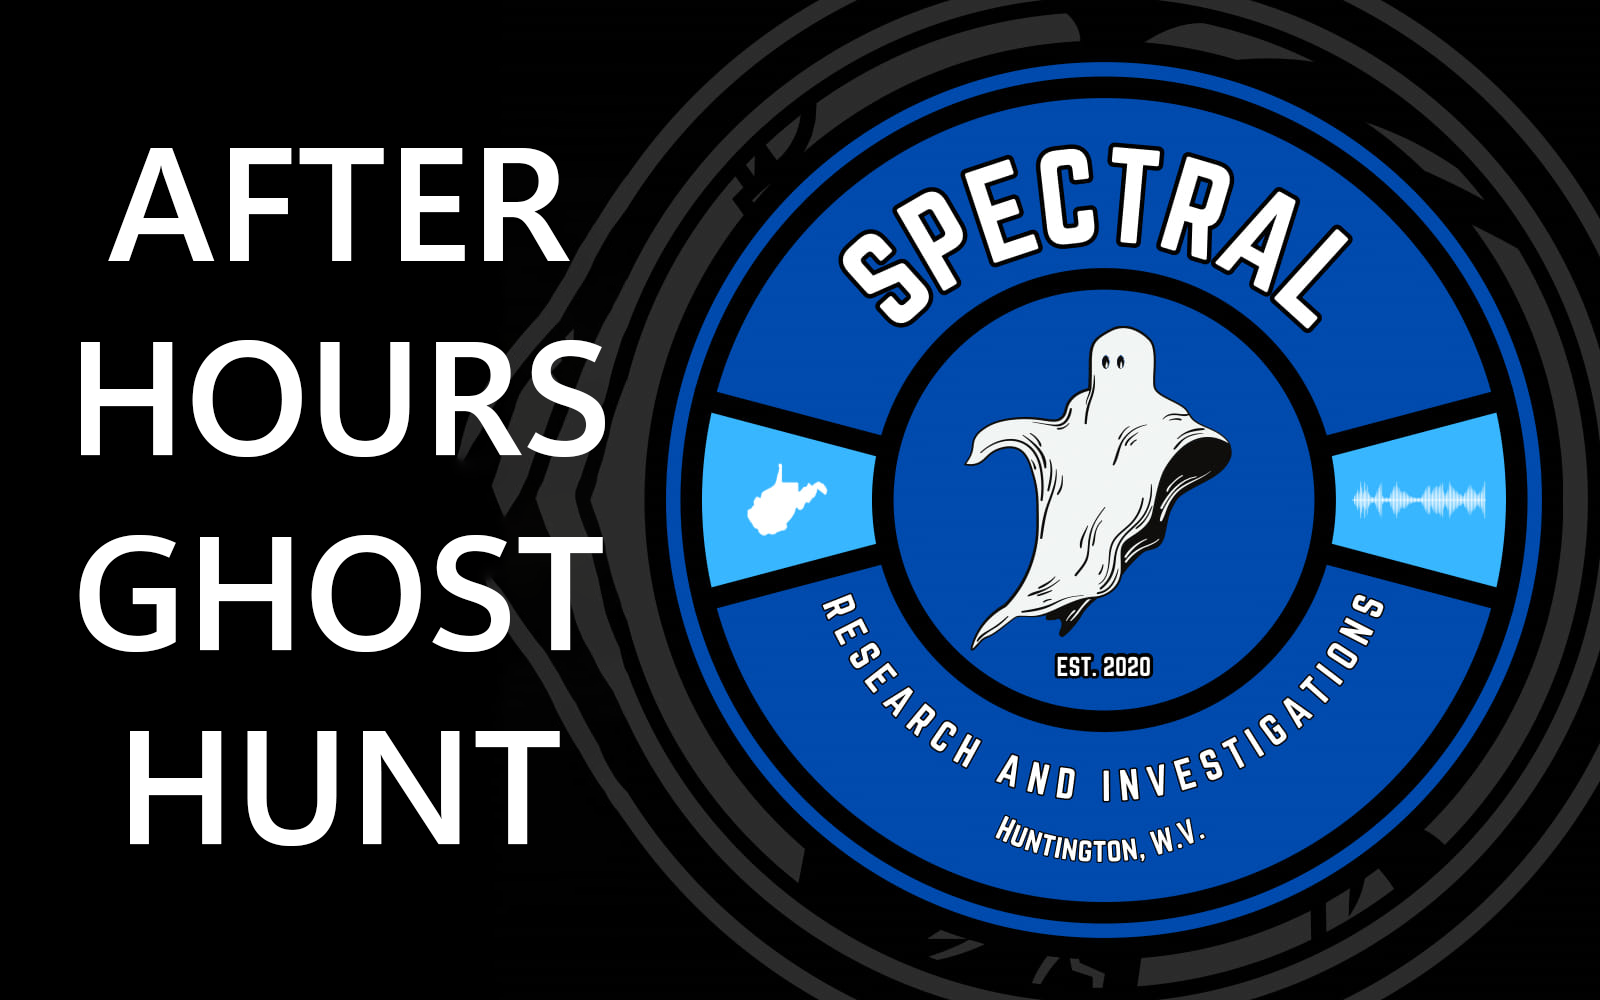 Spectral Research and Investigations